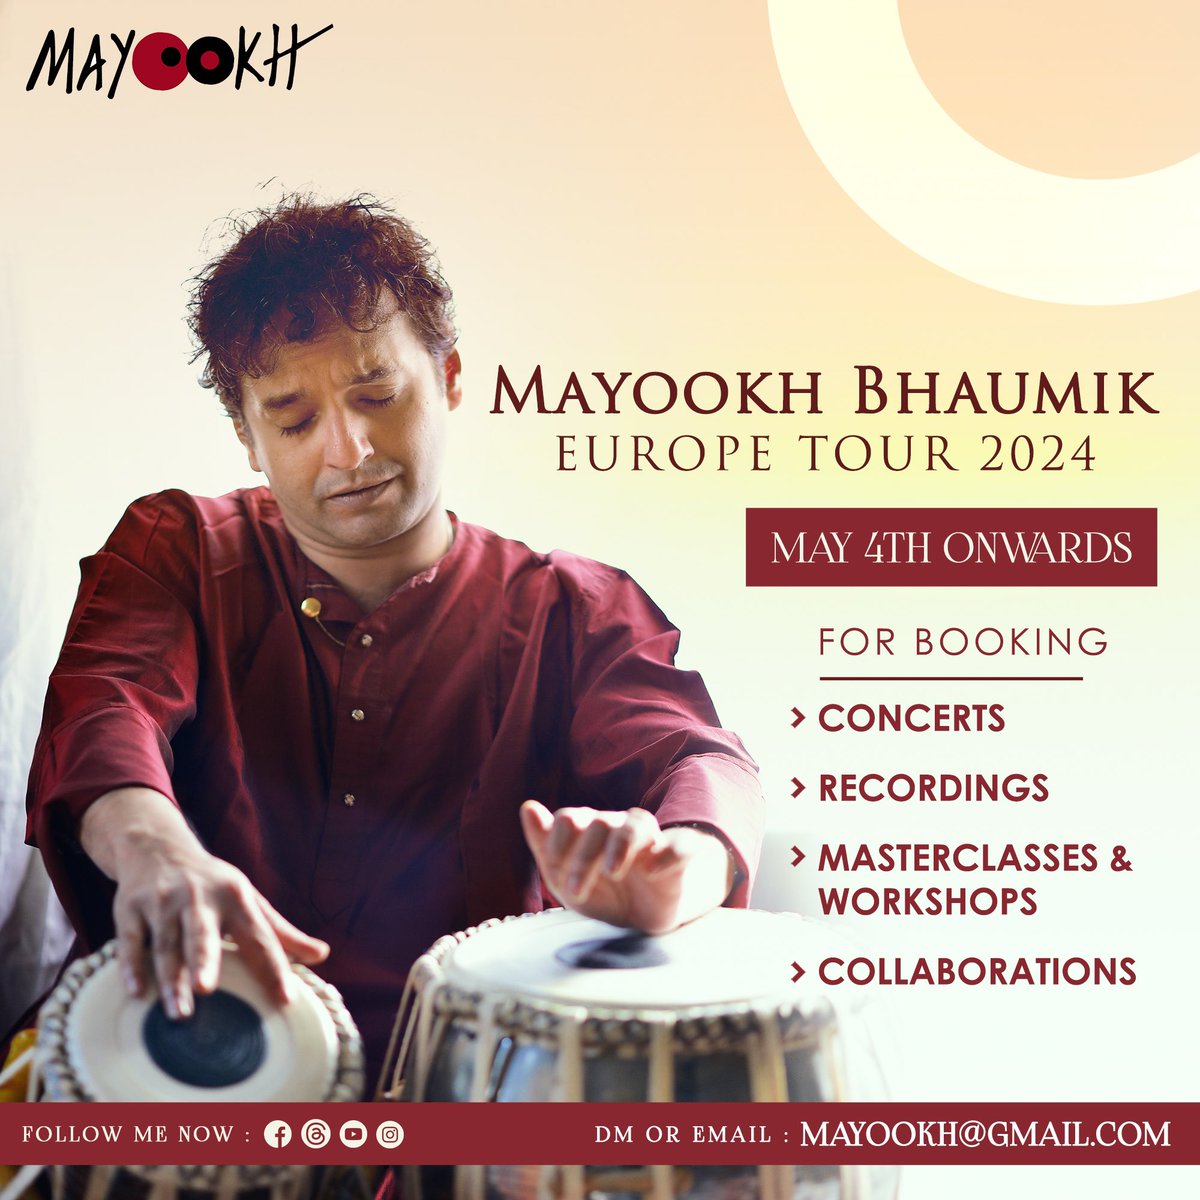 I’m so excited to be touring Europe this May after quite some time. Please do email mayookh@gmail.com or dm me for booking concerts, recordings, workshops and other collaborations. Dates, cities and details coming soon. See you all soon…
.
.
.
#mayookh #mayookhbhaumik #europe